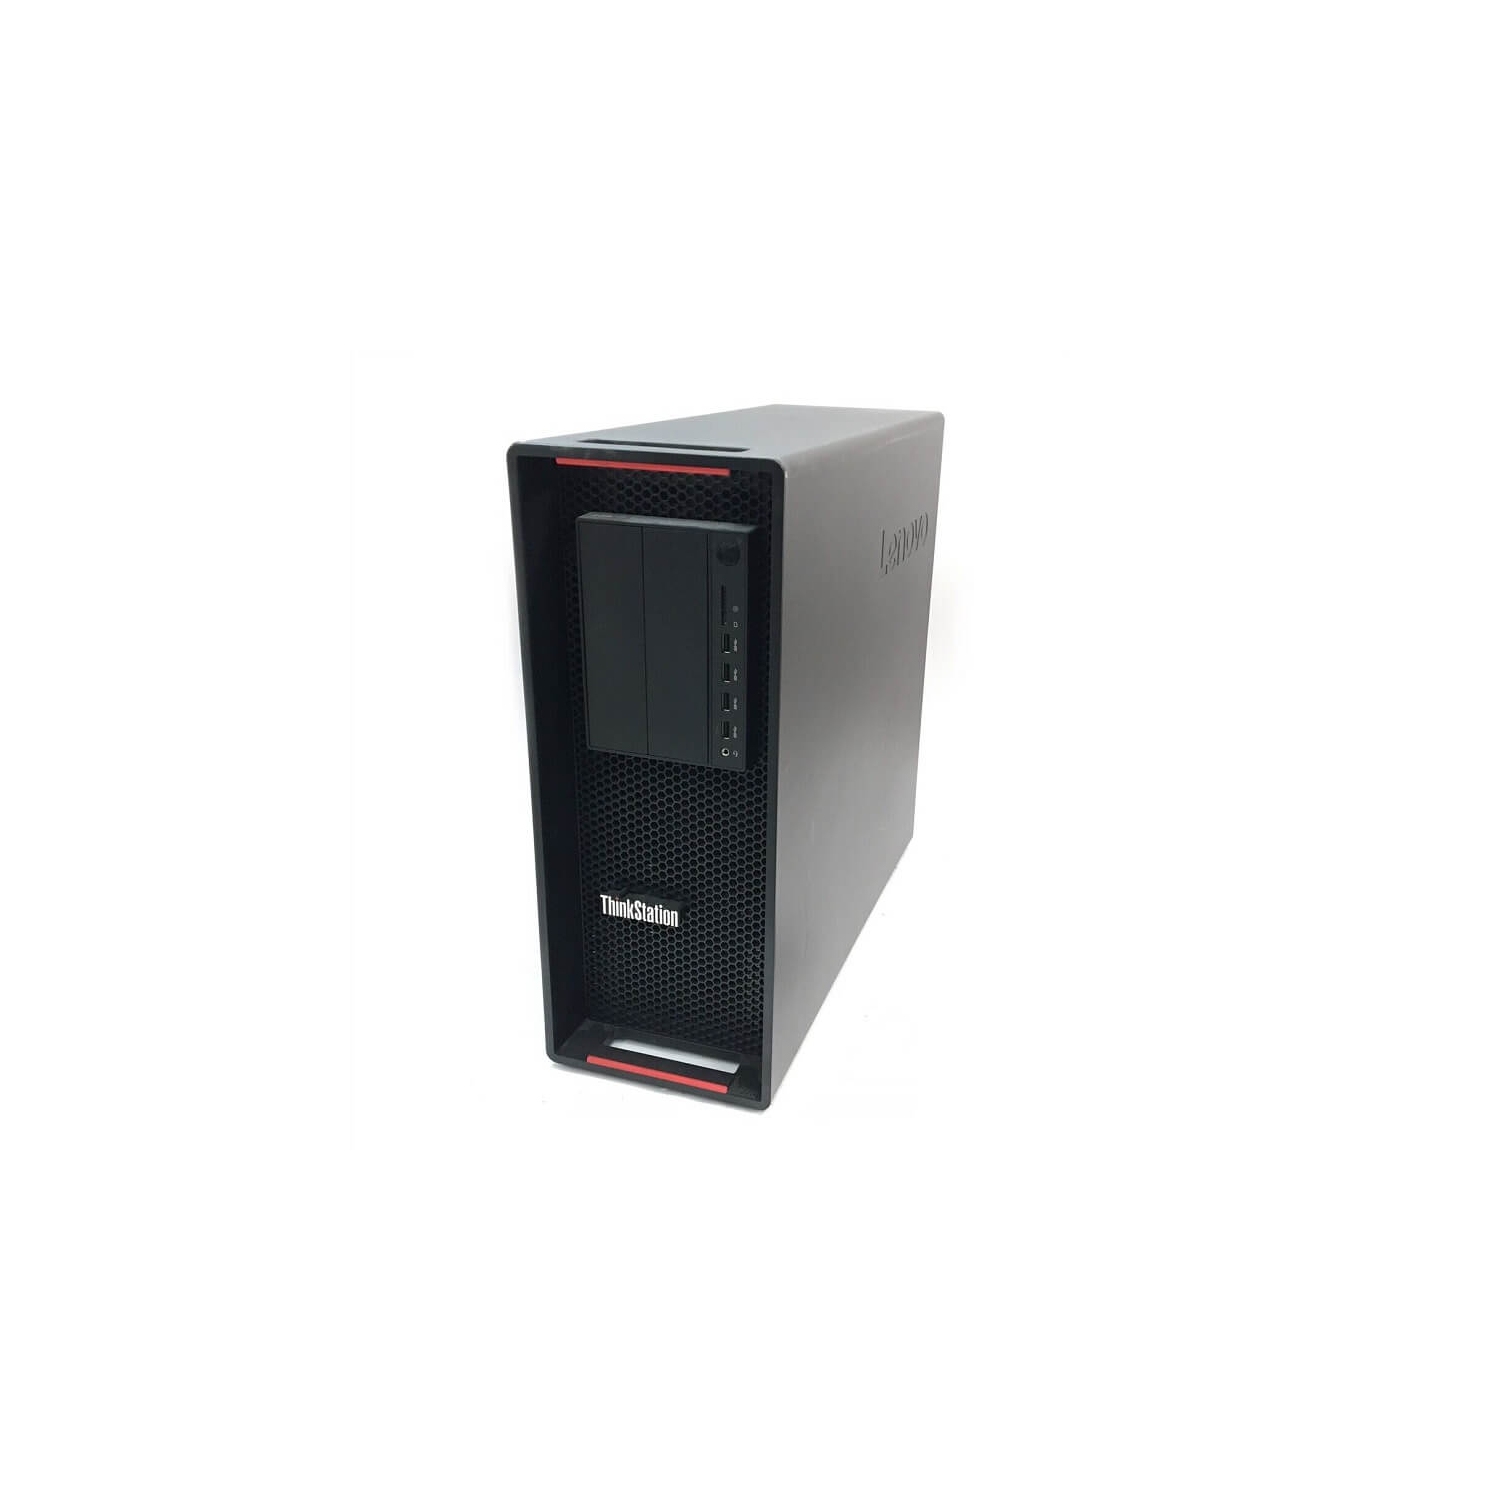 Refurbished (Good) - Lenovo ThinkStation P720 Workstation 2x Gold 6154 Eighteen Core 3Ghz 768GB DDR4 2TB NVMe RTX A2000 Win 11 Pro